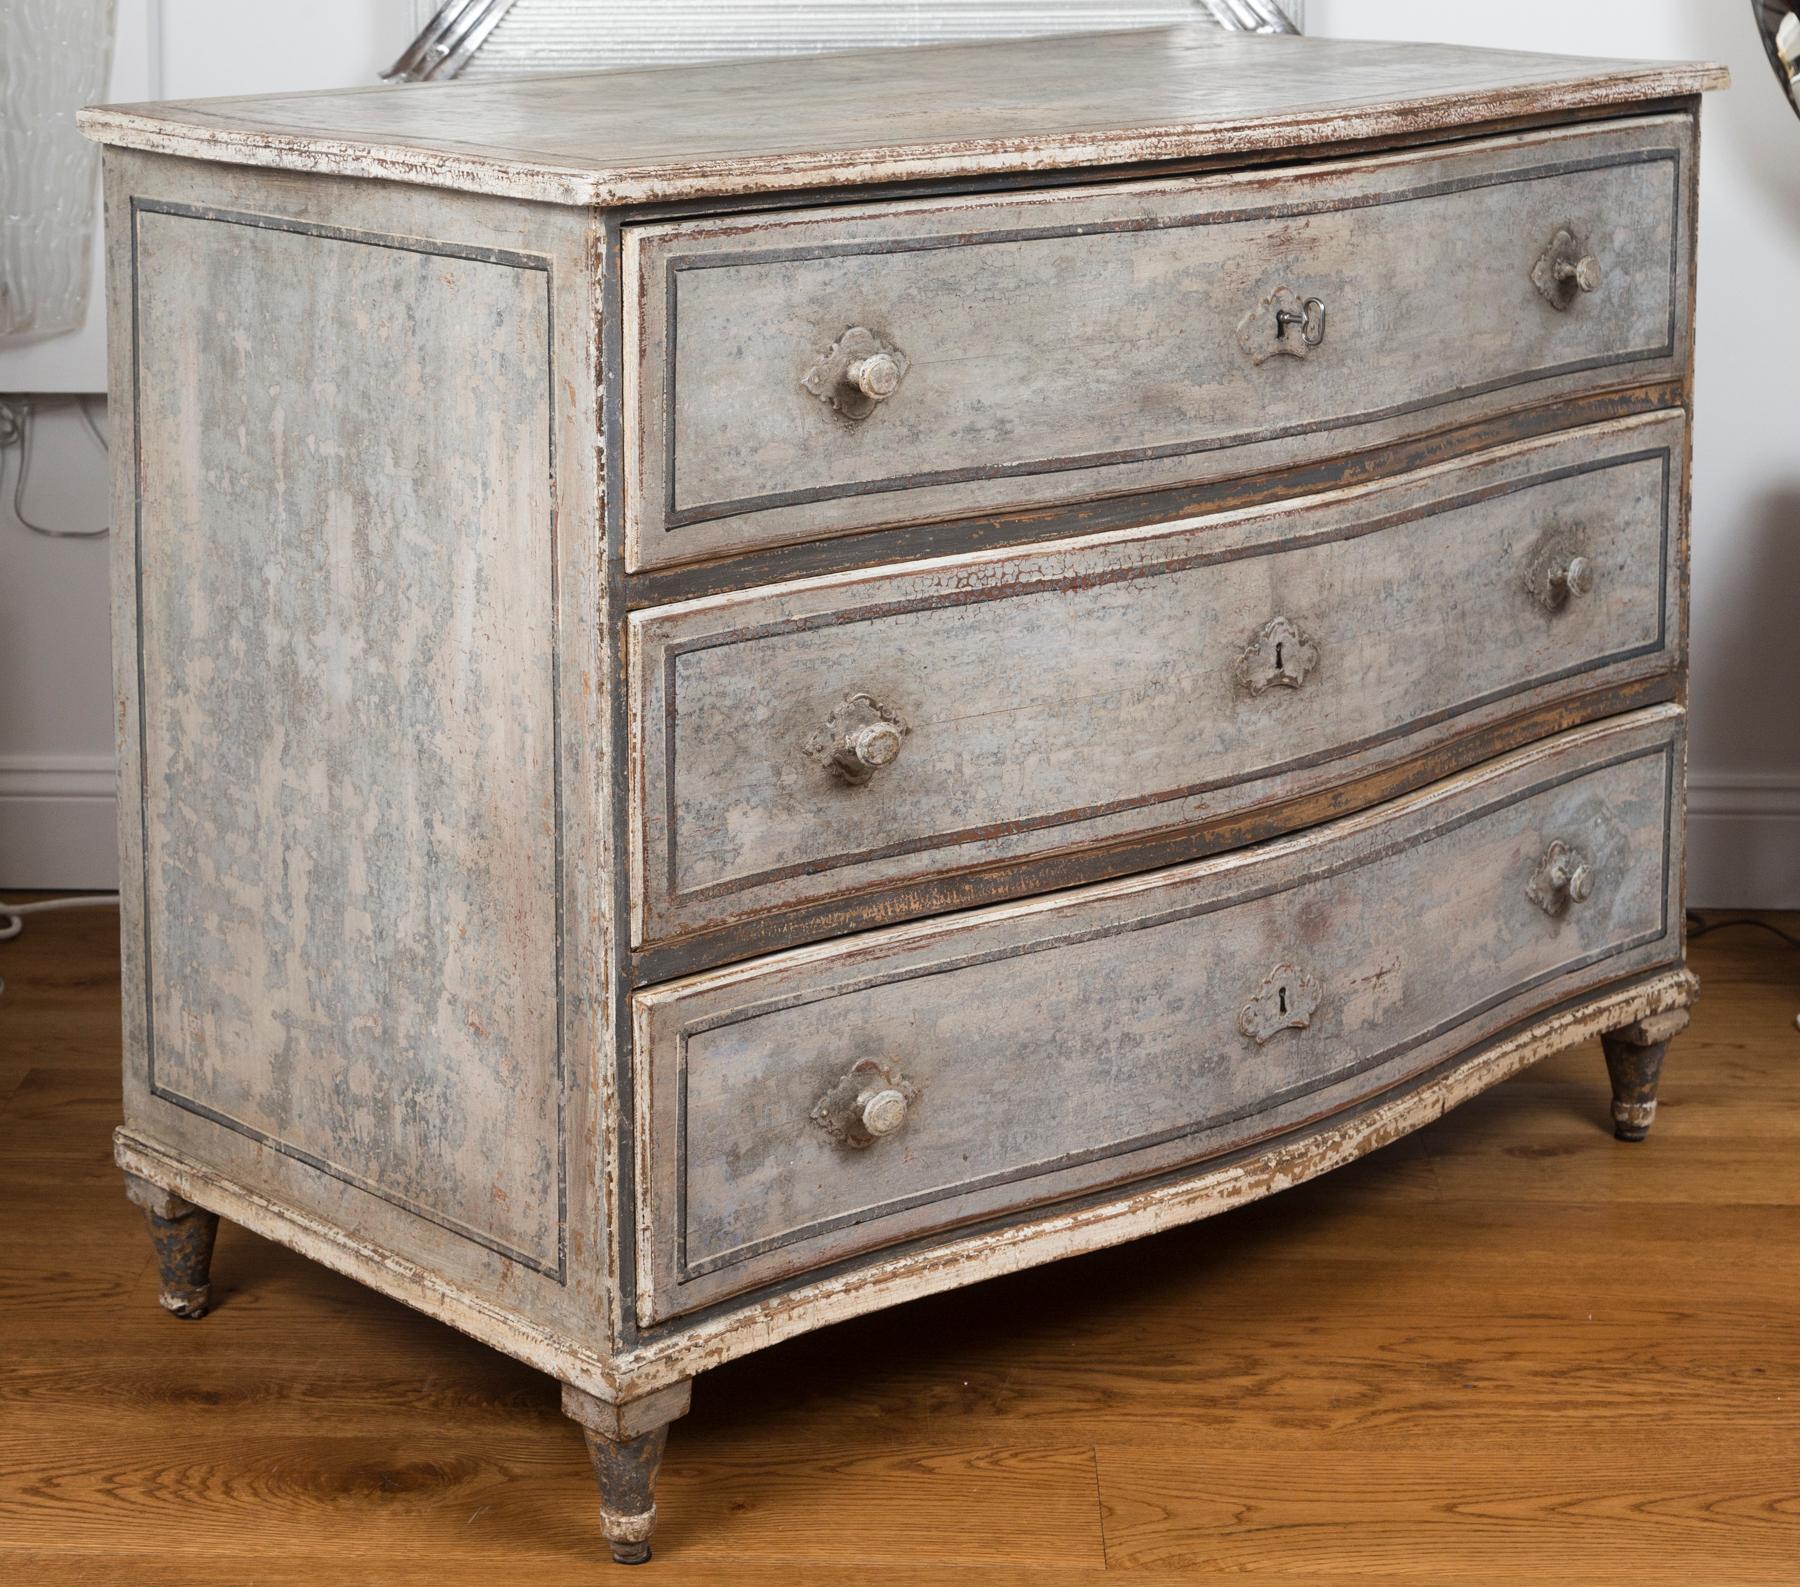 A gently scalloped fronted chest comprised of three long drawers and painted in tones of creme-greige- blue.
Carcass in oak and in original condition with original locks, paint refurbished
Origin: Germany
Period:1780-1810 ca
Condition: Excellent